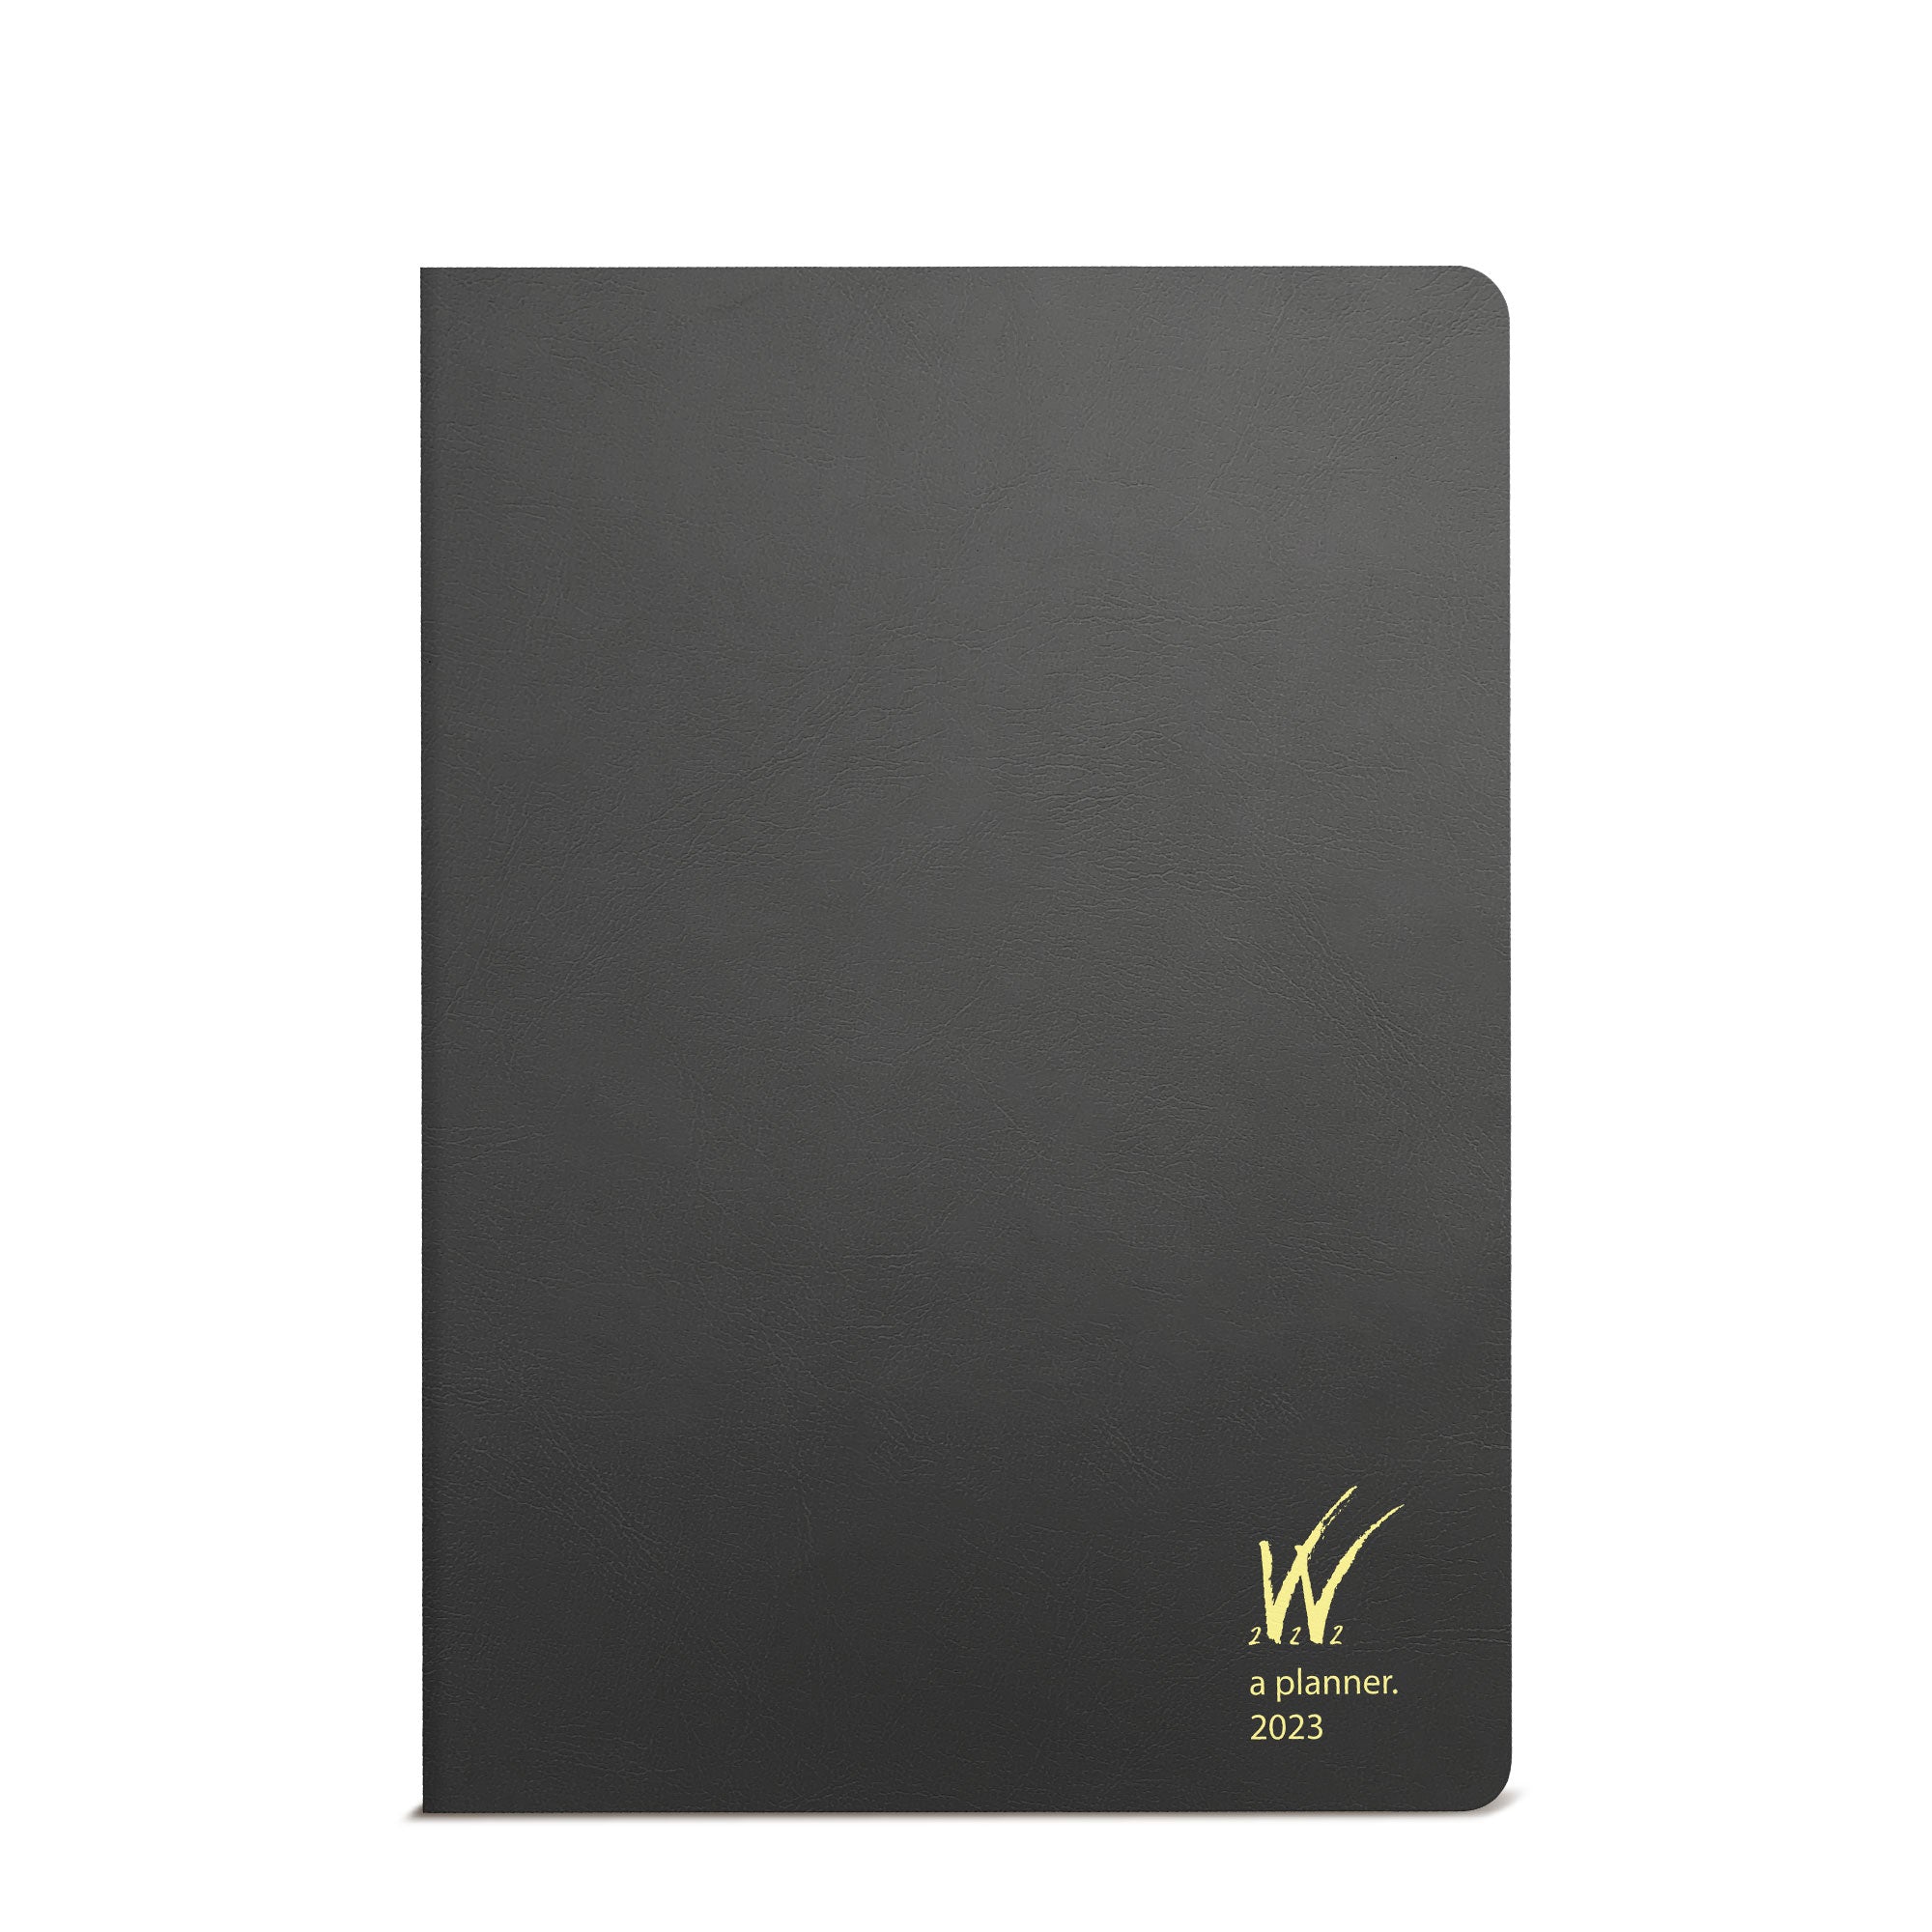 2023 A5 Weekly Planner - 52gsm Tomoe River Paper